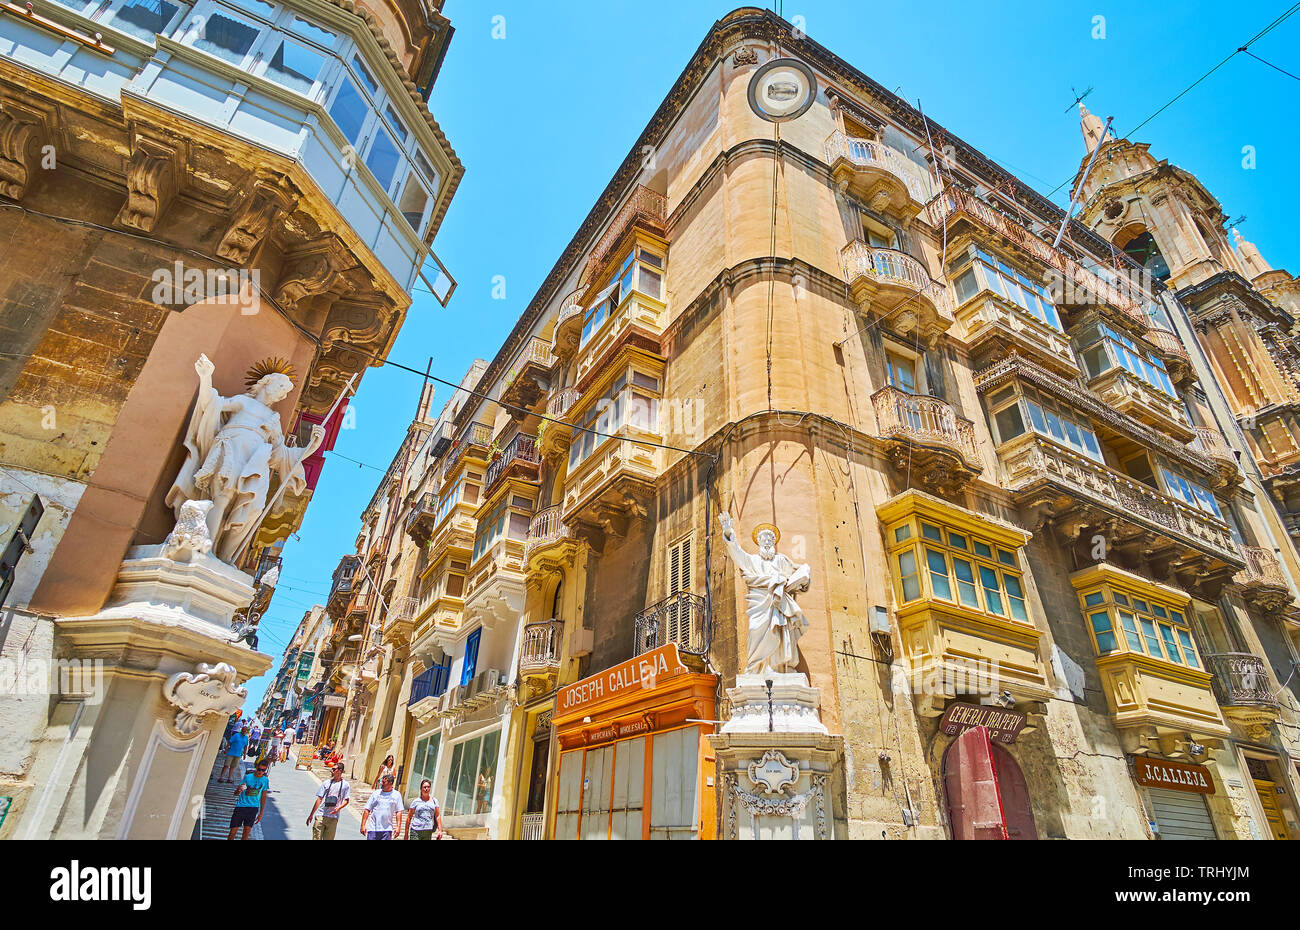 VALLETTA, MALTA - JUNE 19, 2018: The old edifices in St Lucia street are decorated with corner statues of St John and St Paul, on June 19 in Valletta Stock Photo